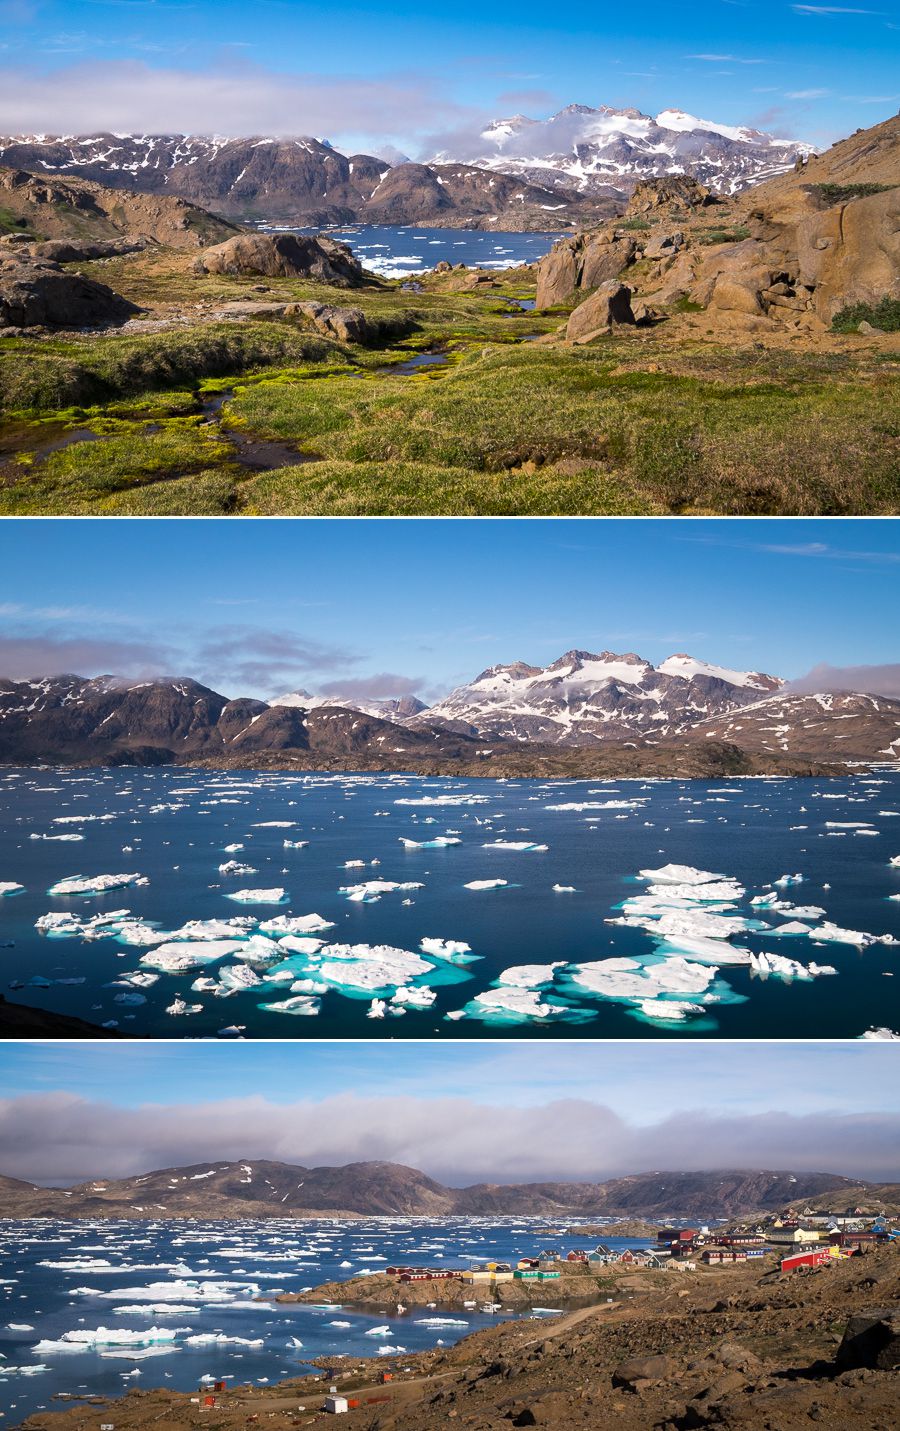 Views of the Tasiilaq fjord as I re-enter the town after the Flower Valley Hike, East Greenland